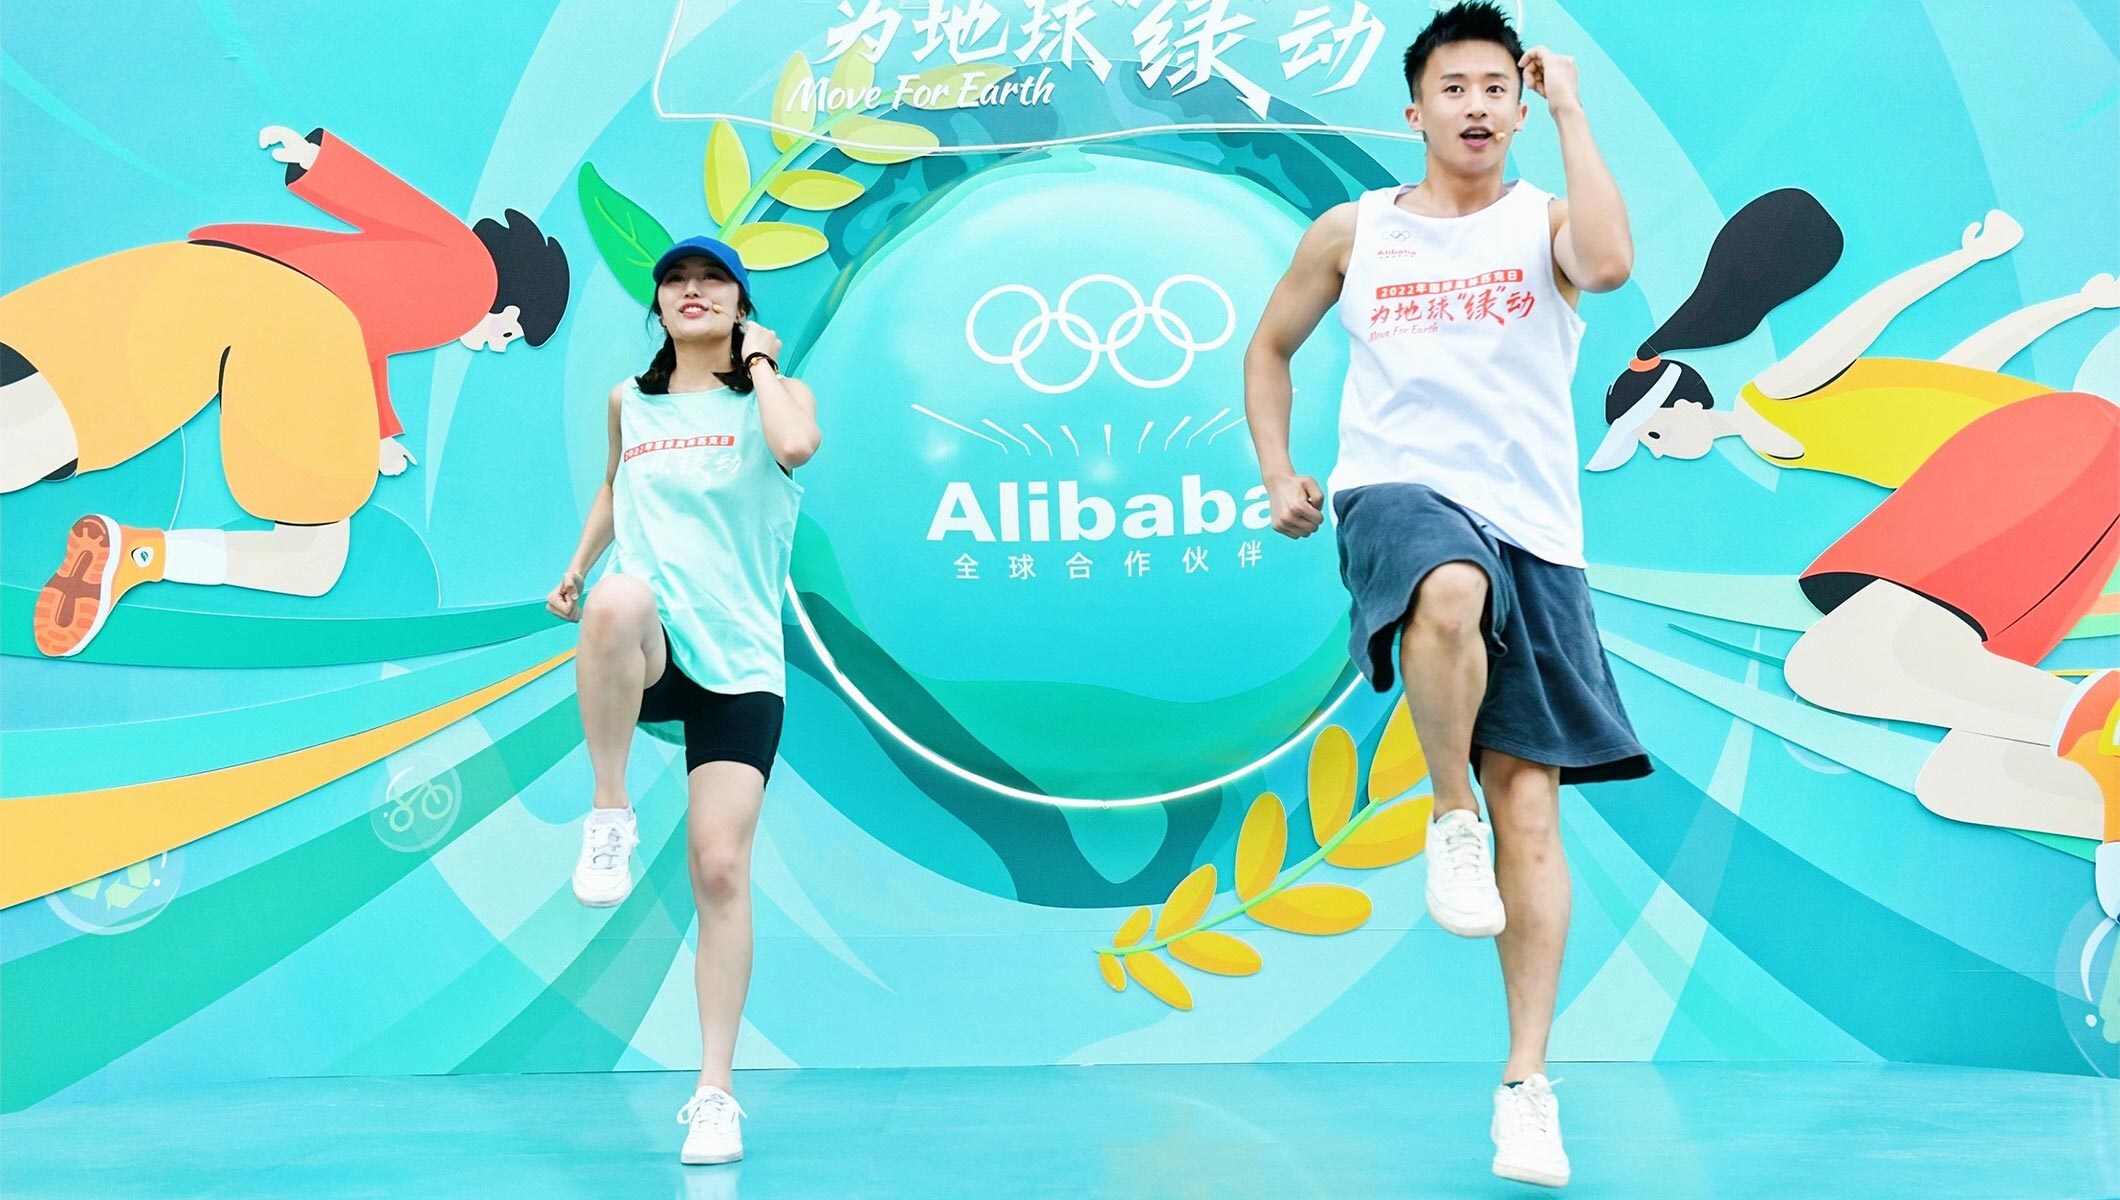 Alibaba employees enjoyed a dance workout to celebrate Olympic Day